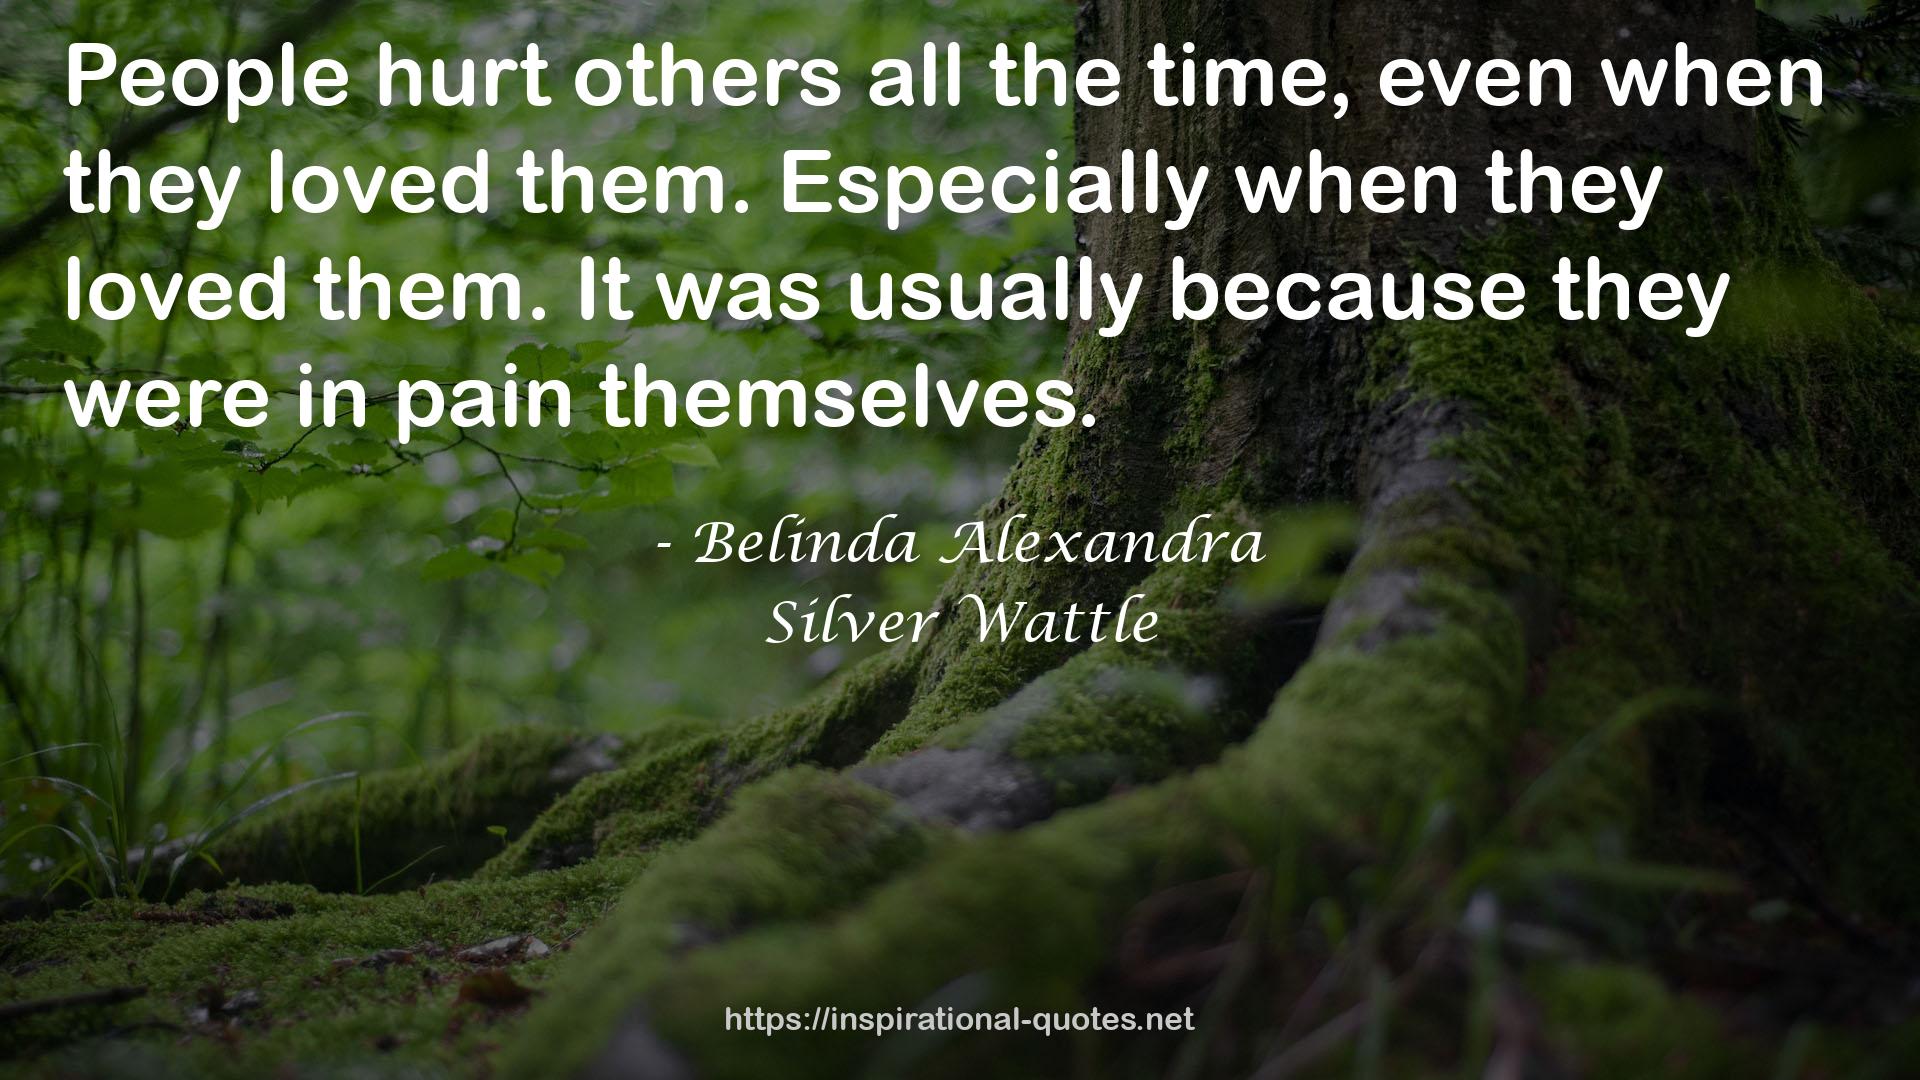 Silver Wattle QUOTES